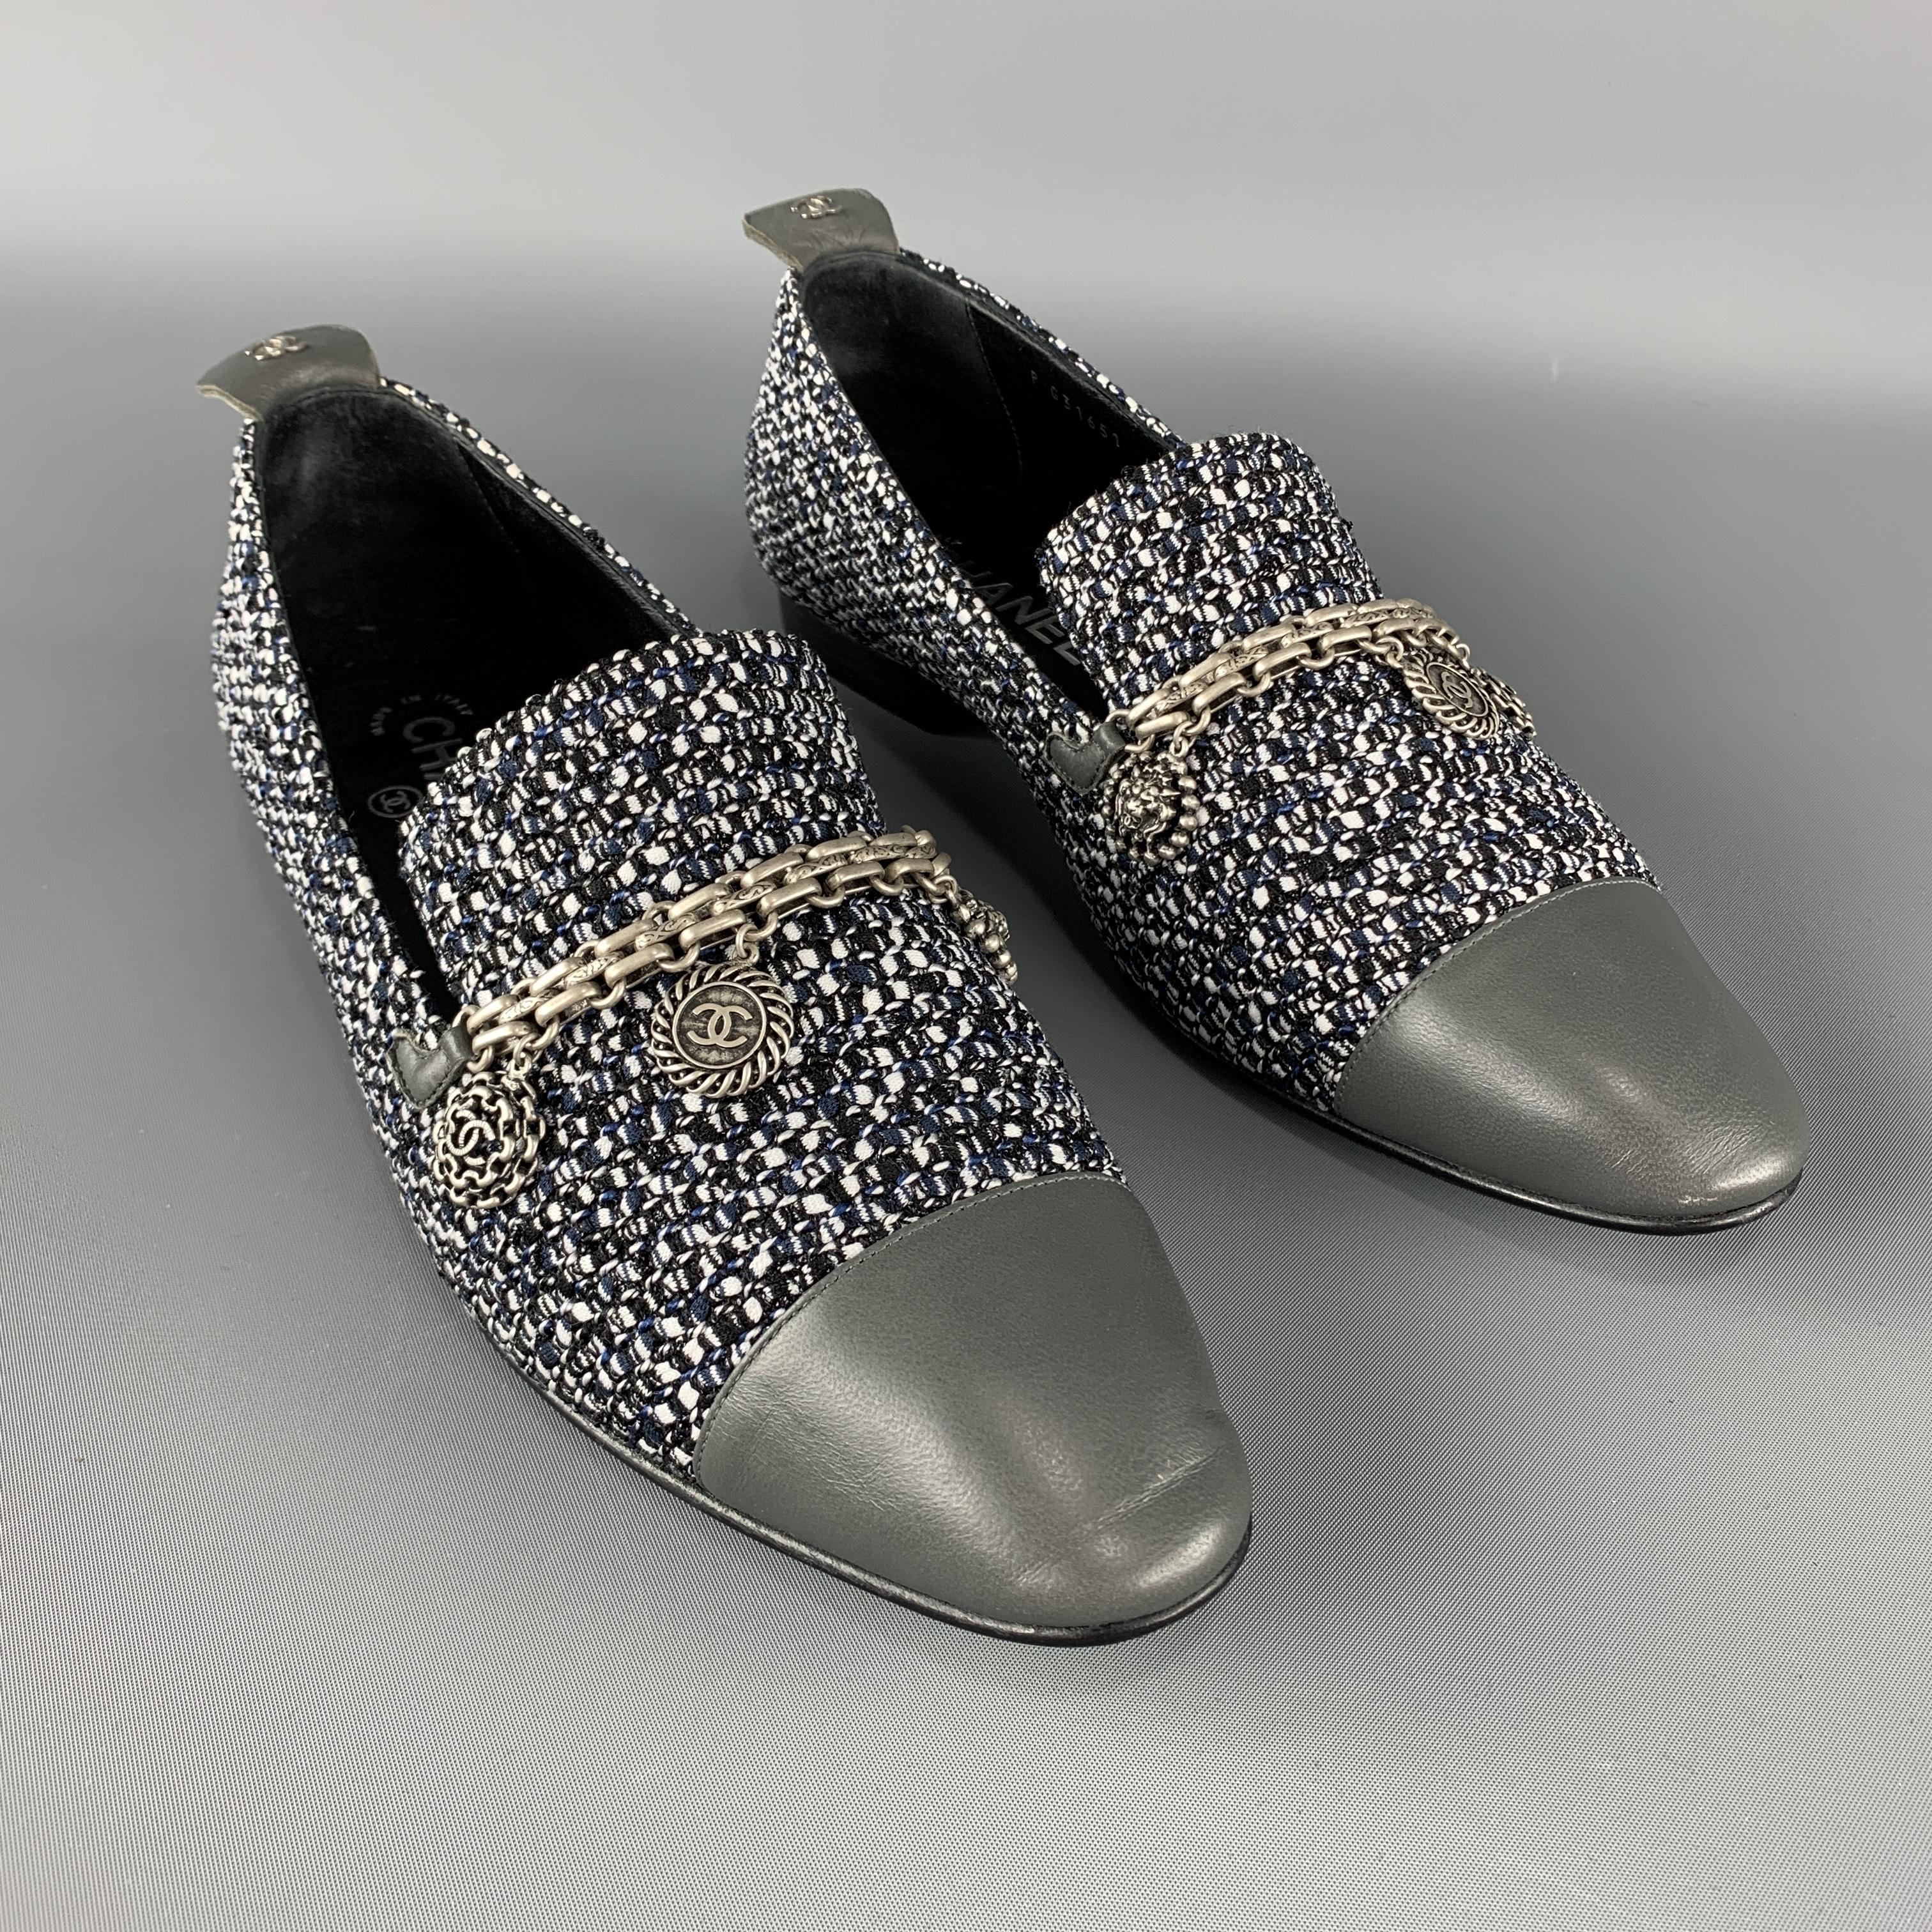 CHANEL Loafer Flats comes in grey tones in a tweed material, with silver metal tone charms and a cap toe. Made in Italy.
 
Excellent Pre-Owned Condition.
Marked: IT 40 1/2    P G31651
 
Outsole: 11 x 3.5 in